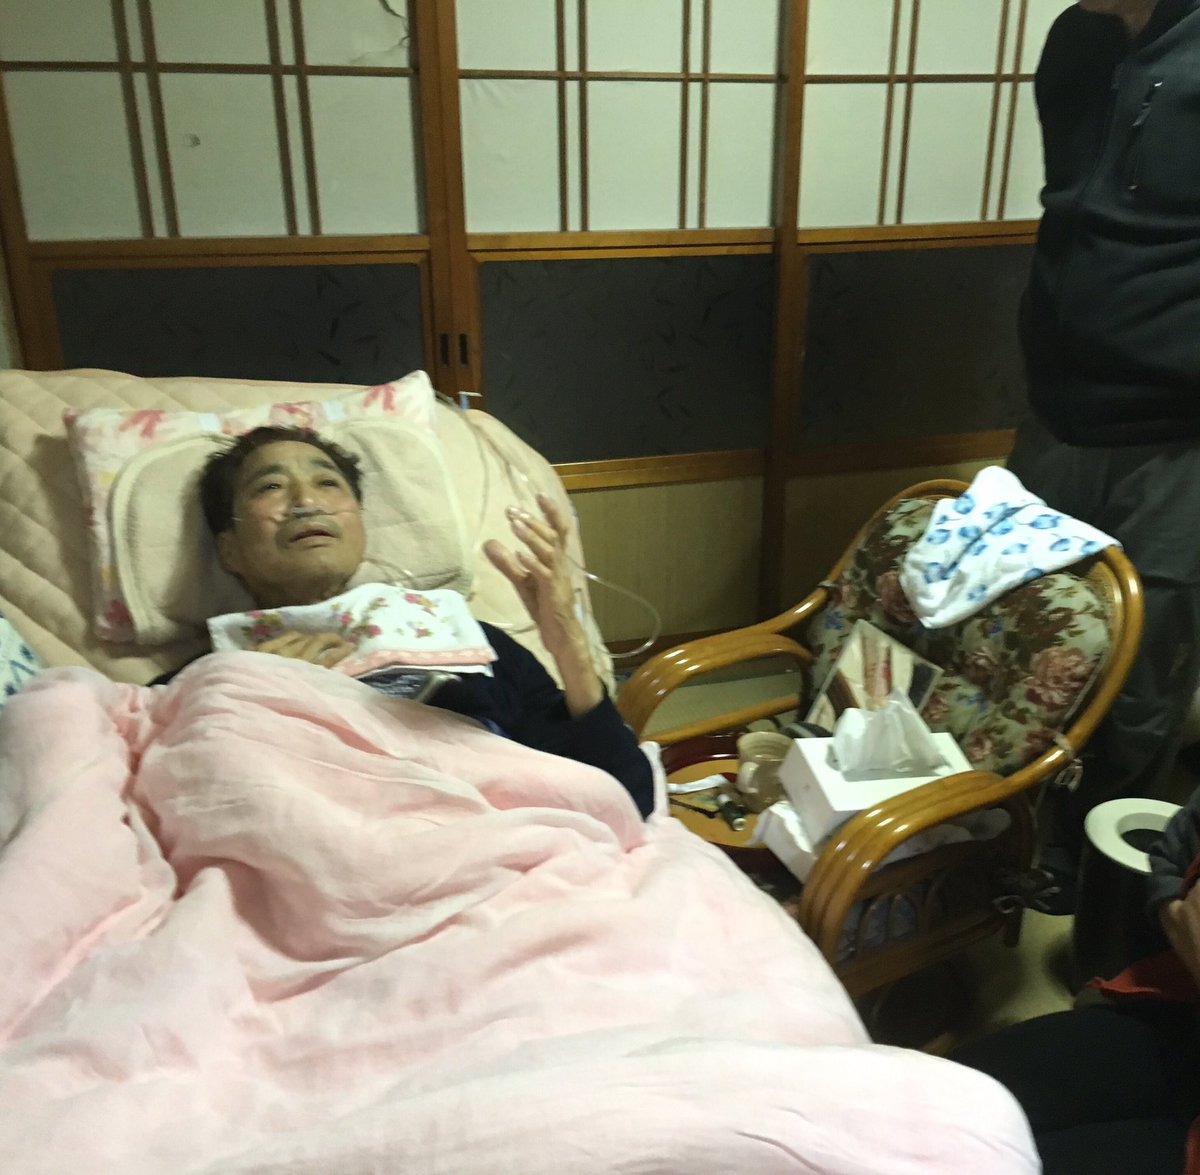 From his bed, Mr Hata told stories and entertained visitors w/ jokes. https://t.co/QoPilynCIs